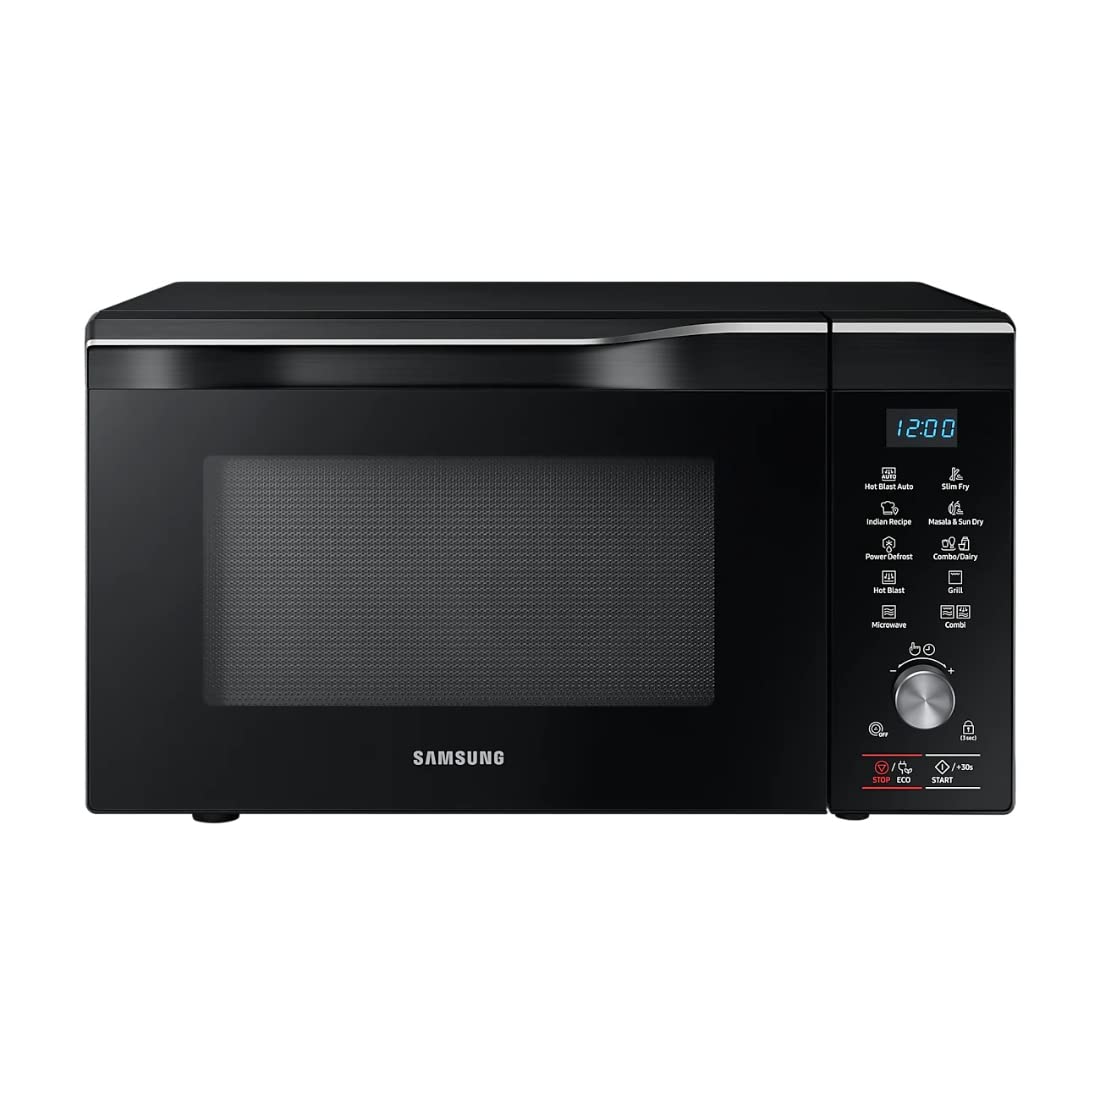 Samsung MC32A7056CK 32 L Convection Microwave Oven